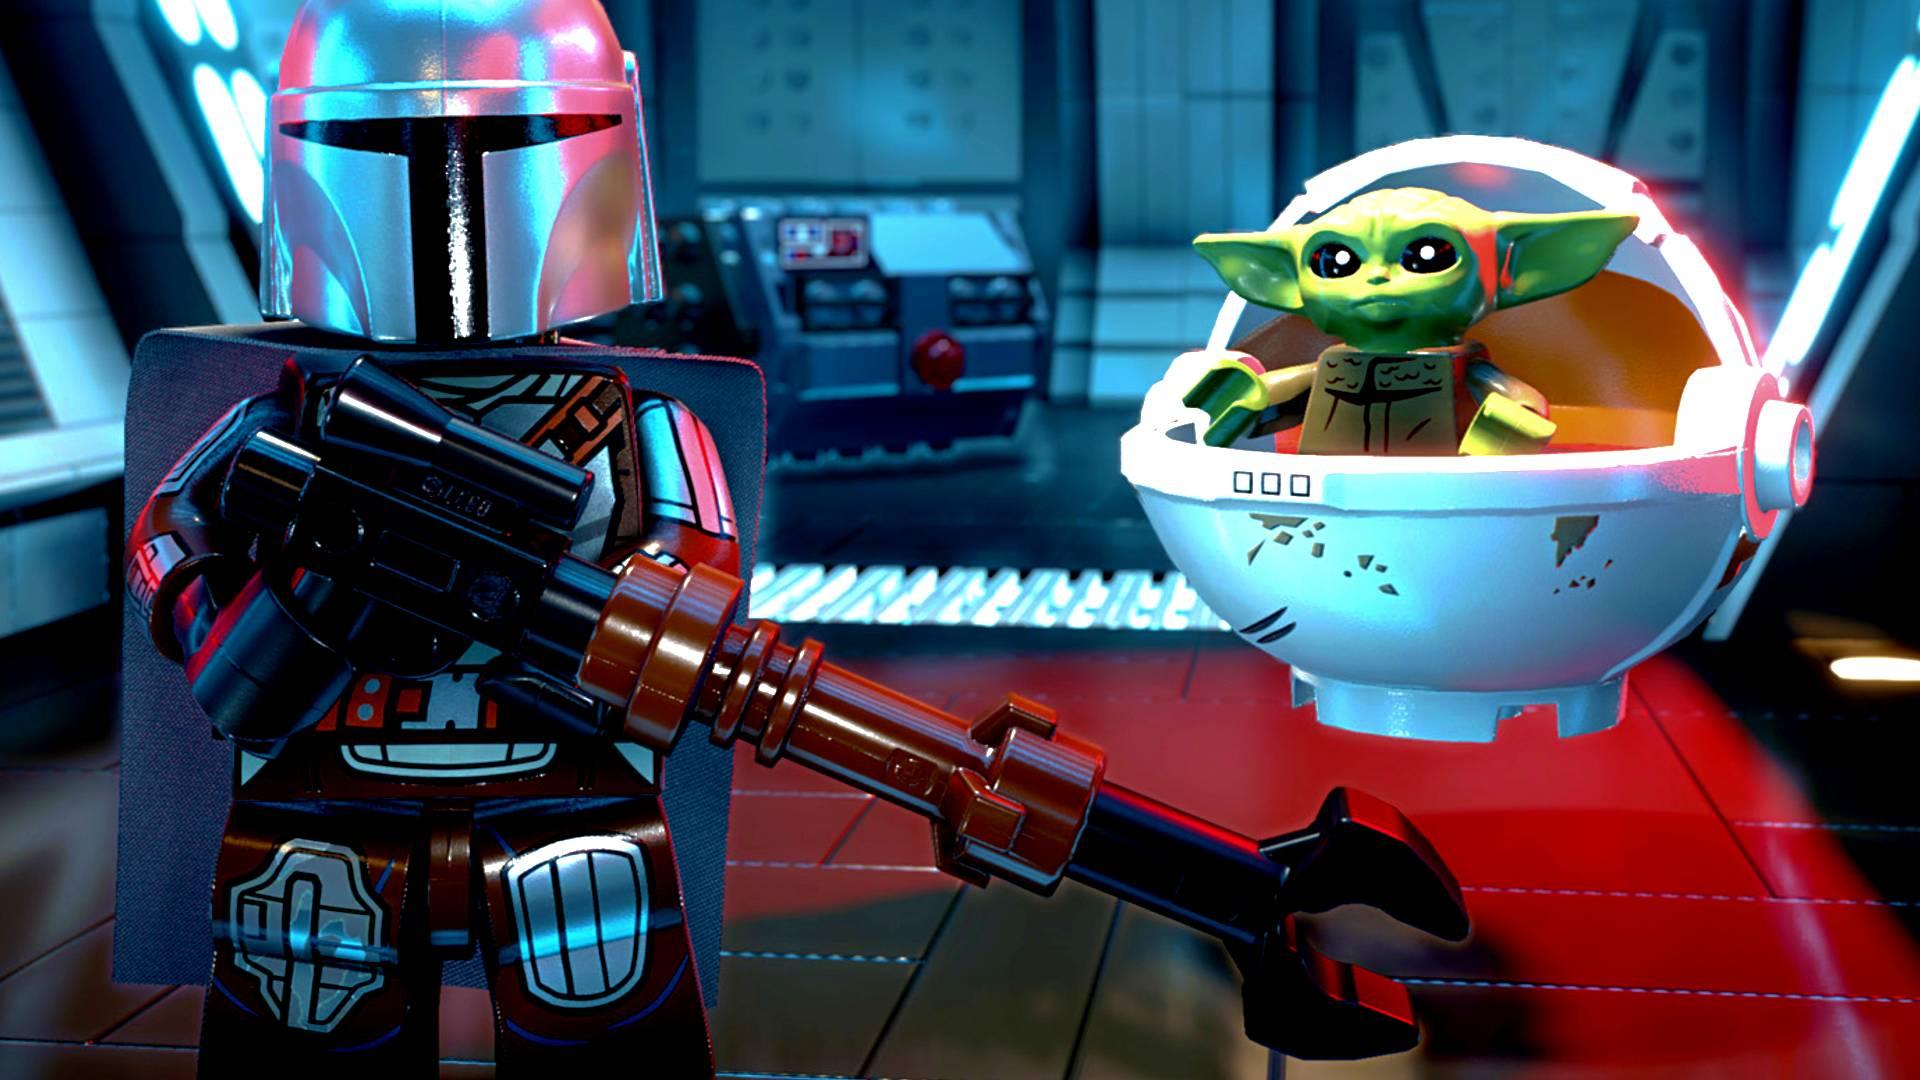 Lego Star Wars The Skywalker Saga DLC, Rogue One, and more | The Loadout